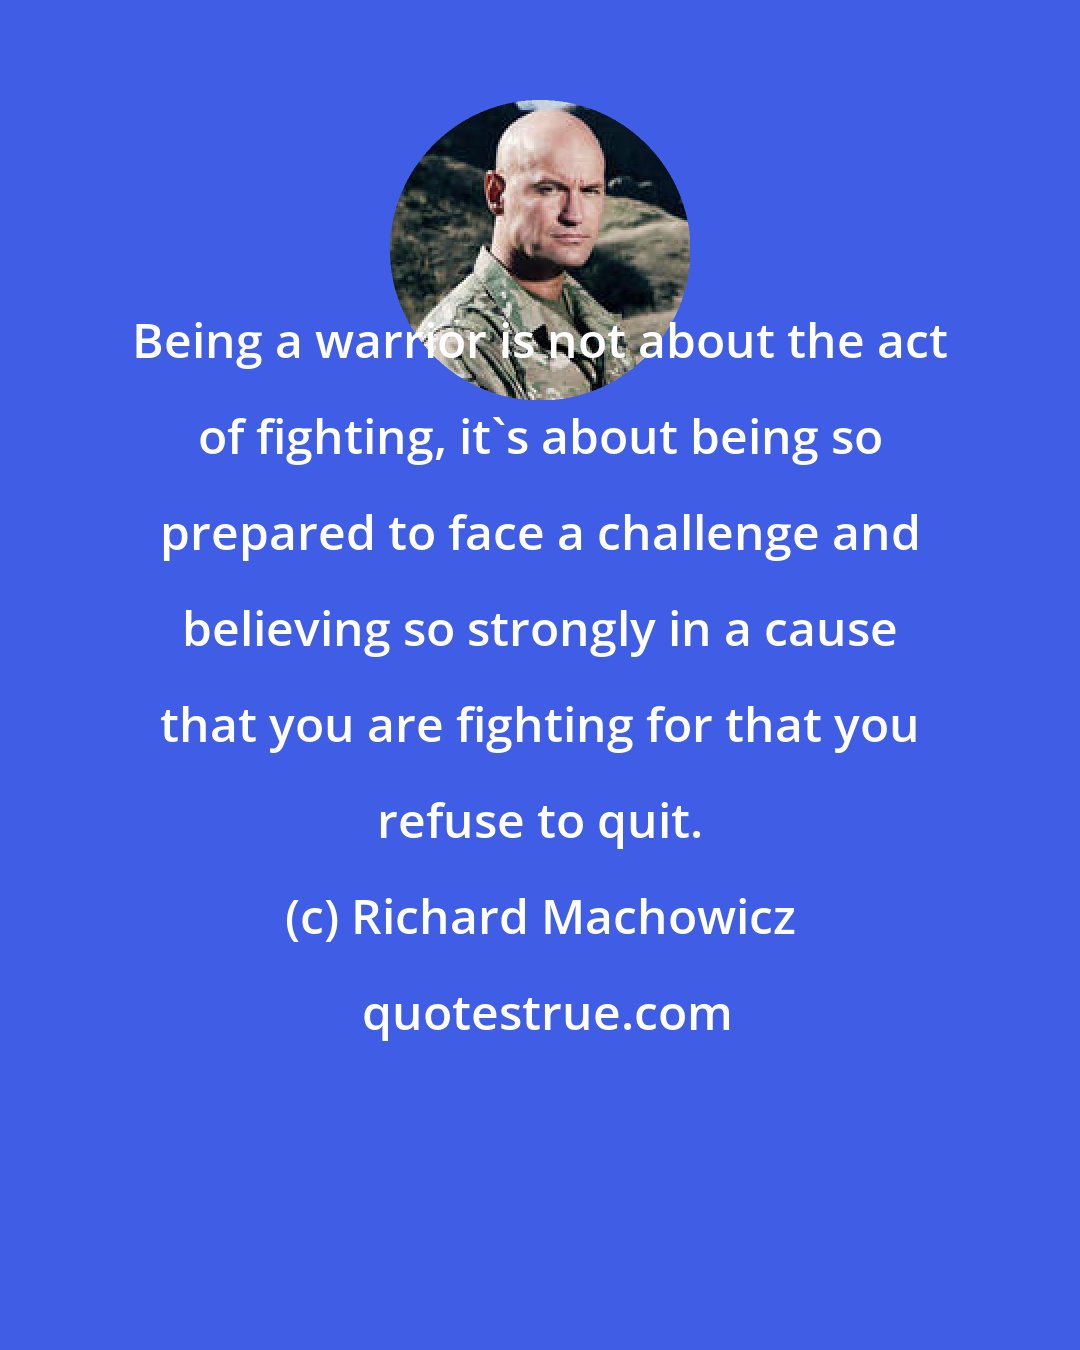 Richard Machowicz: Being a warrior is not about the act of fighting, it's about being so prepared to face a challenge and believing so strongly in a cause that you are fighting for that you refuse to quit.